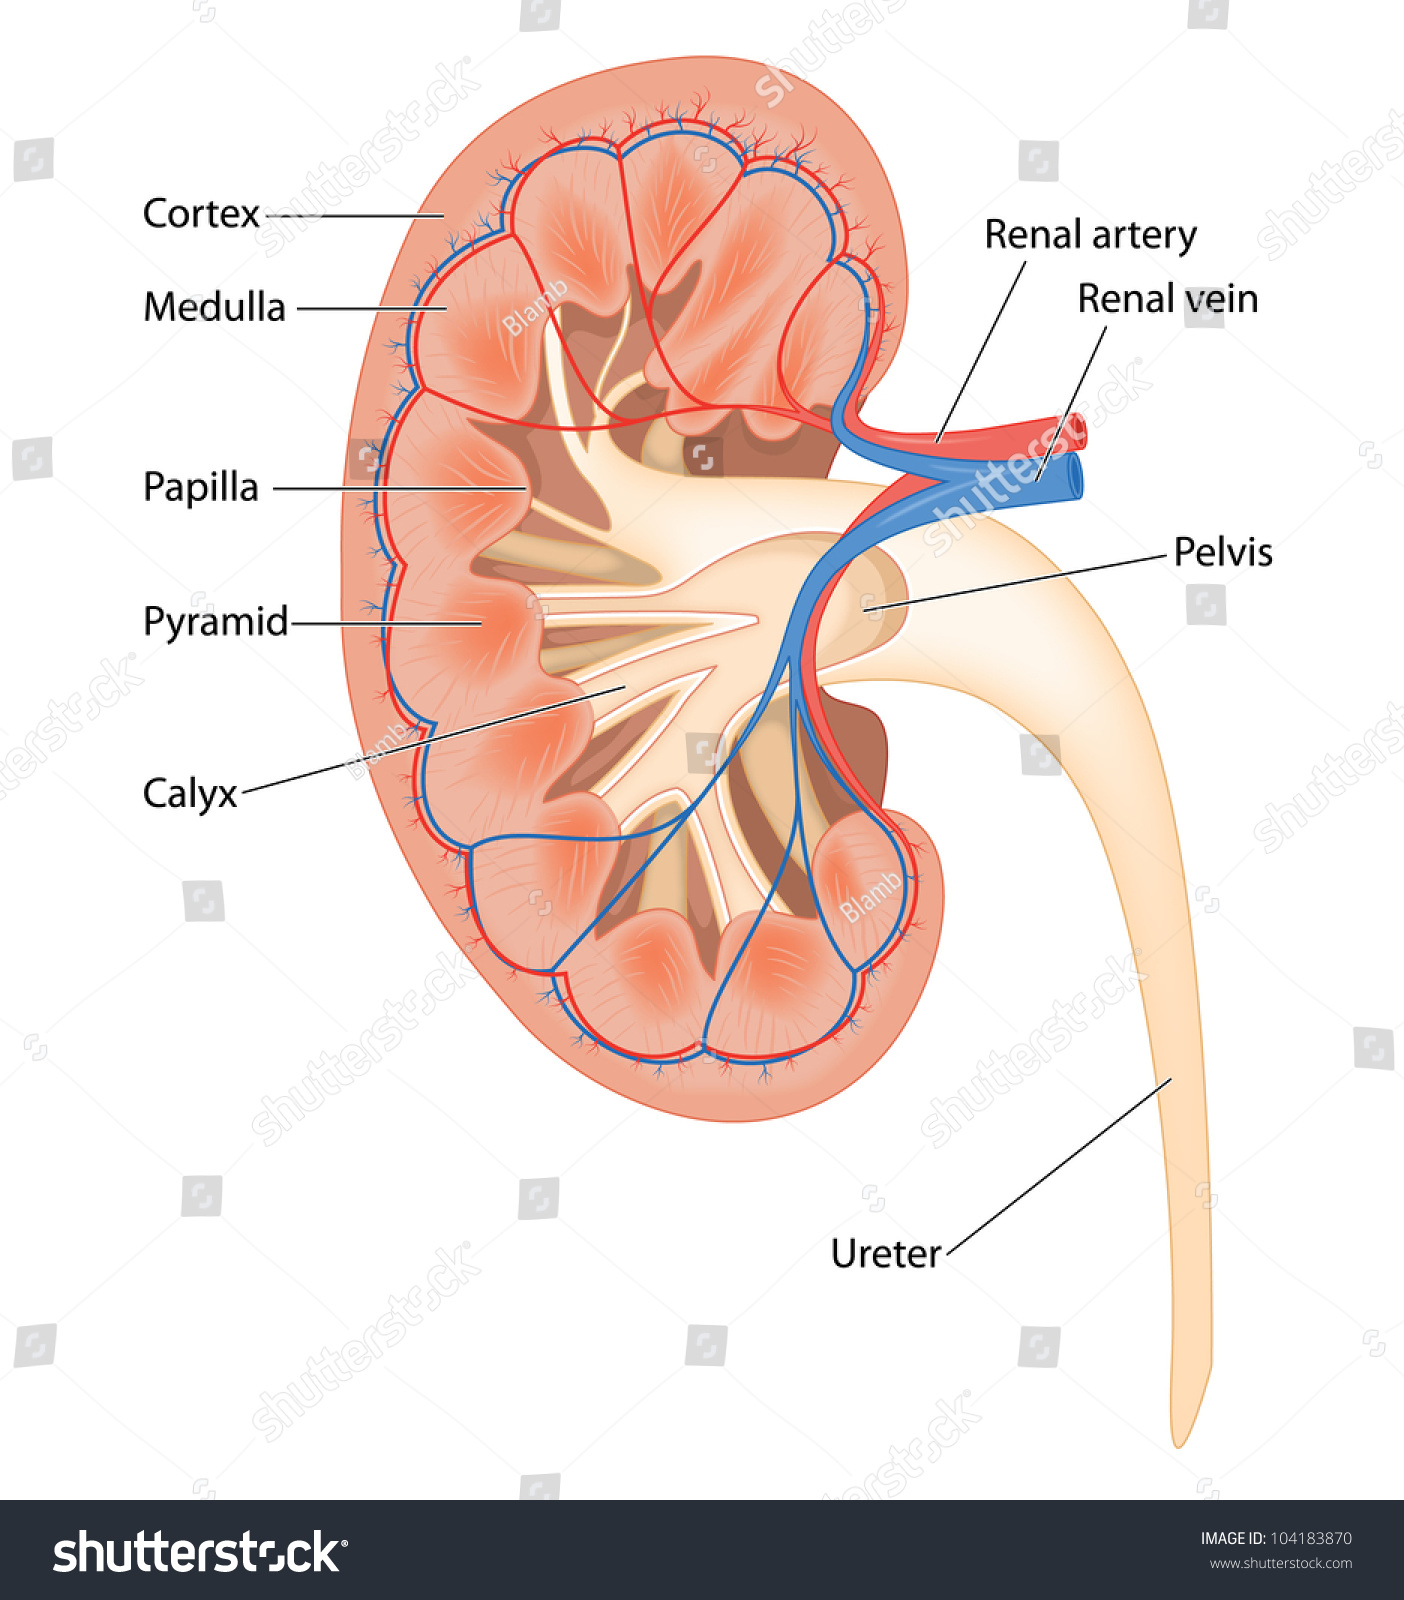 What function does a calyx perform in the kidneys?